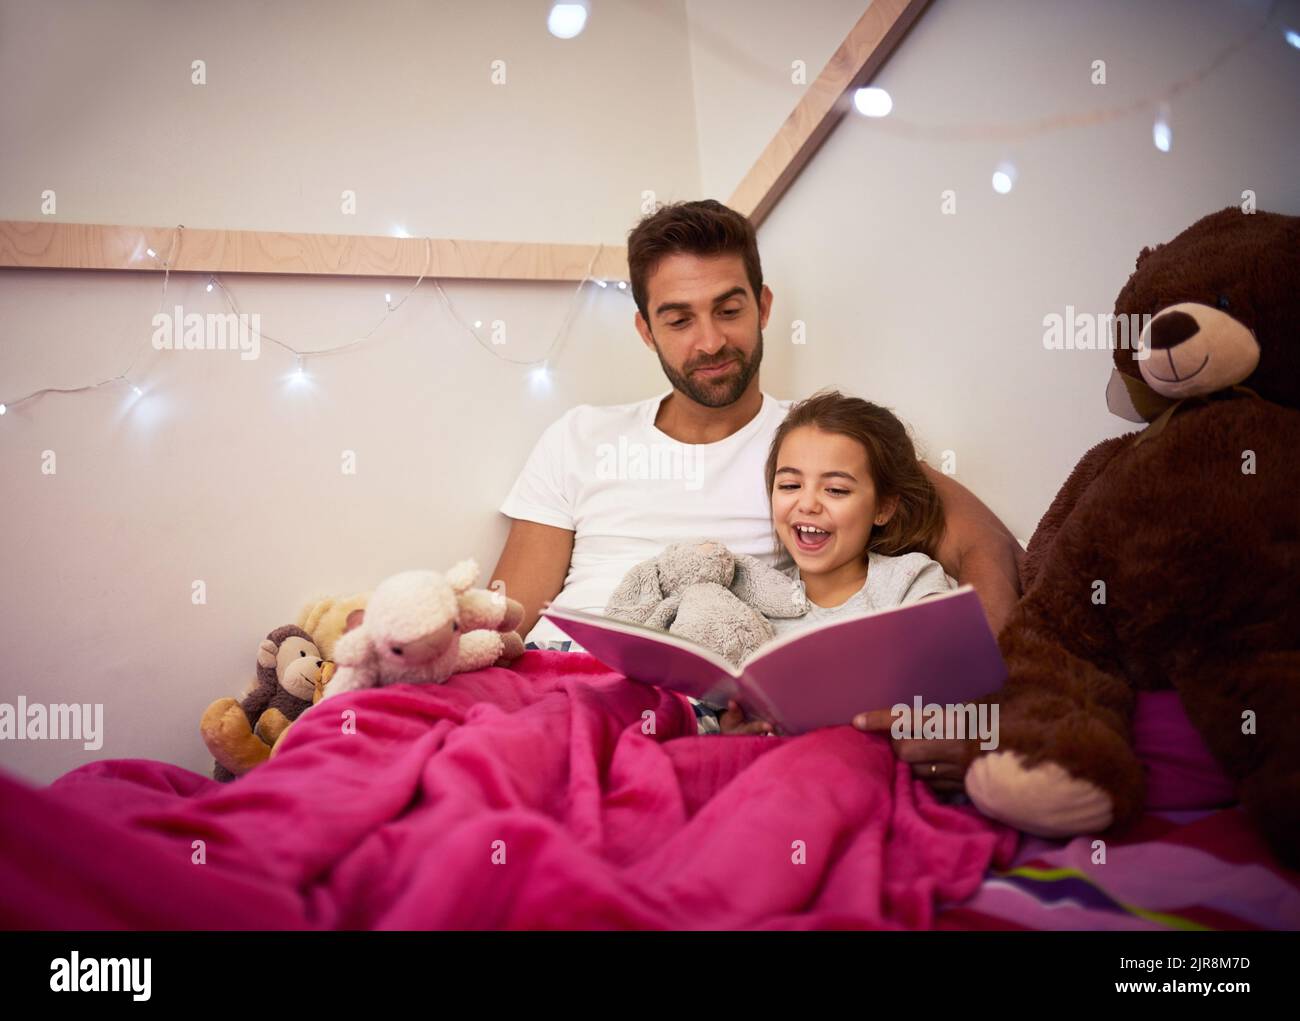 Shell be having lots of magical dreams tonight. a father reading a book with his little daughter in bed at home. Stock Photo